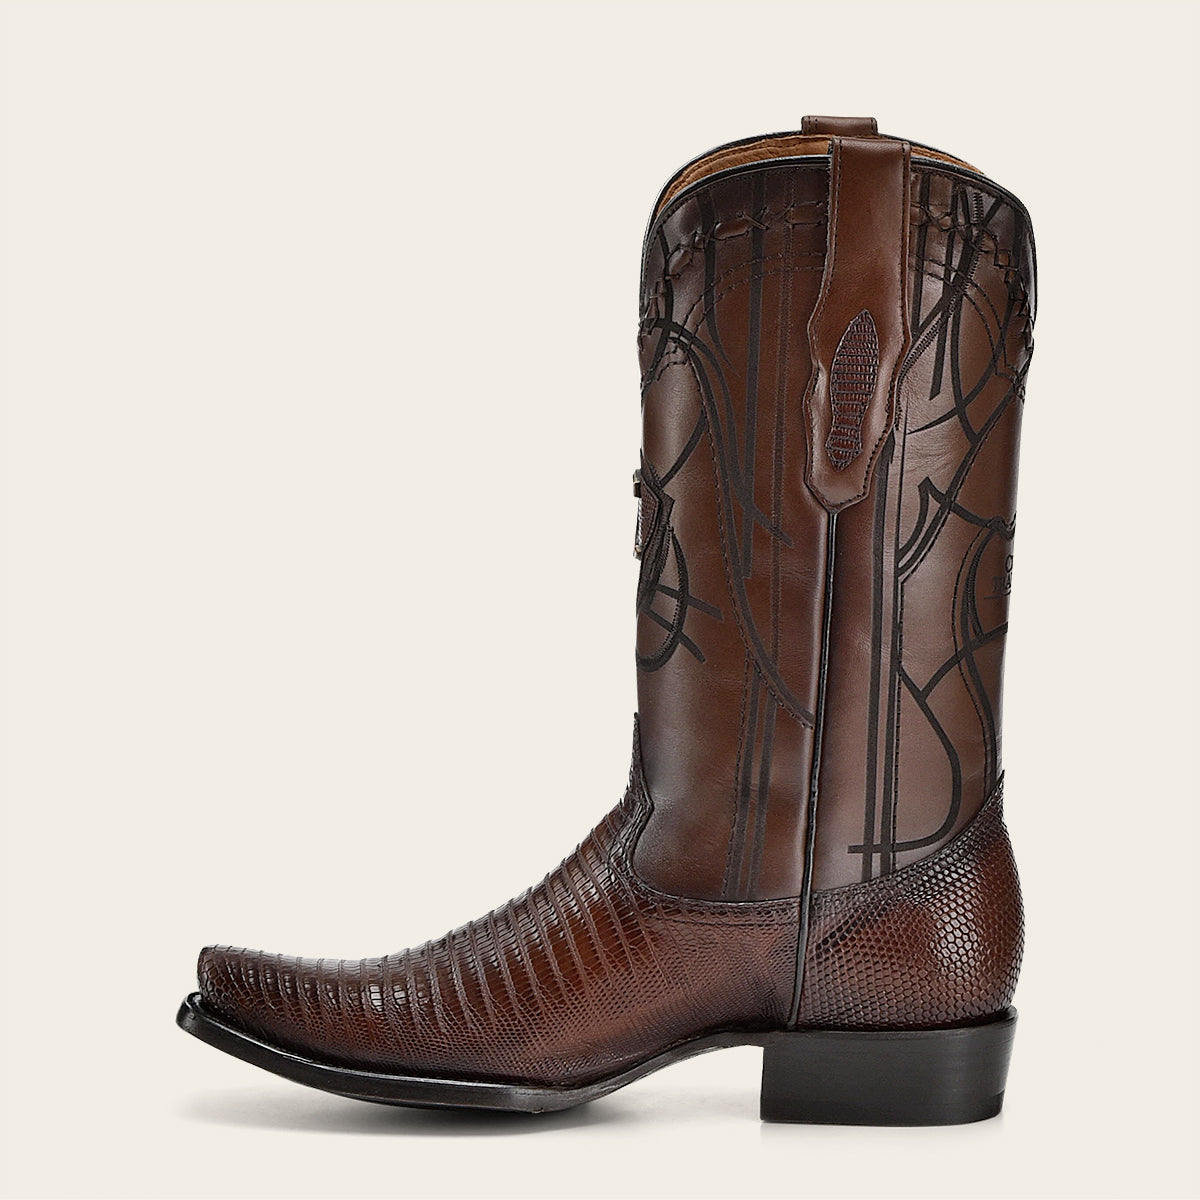 Engraved honey exotic lizard leather boot